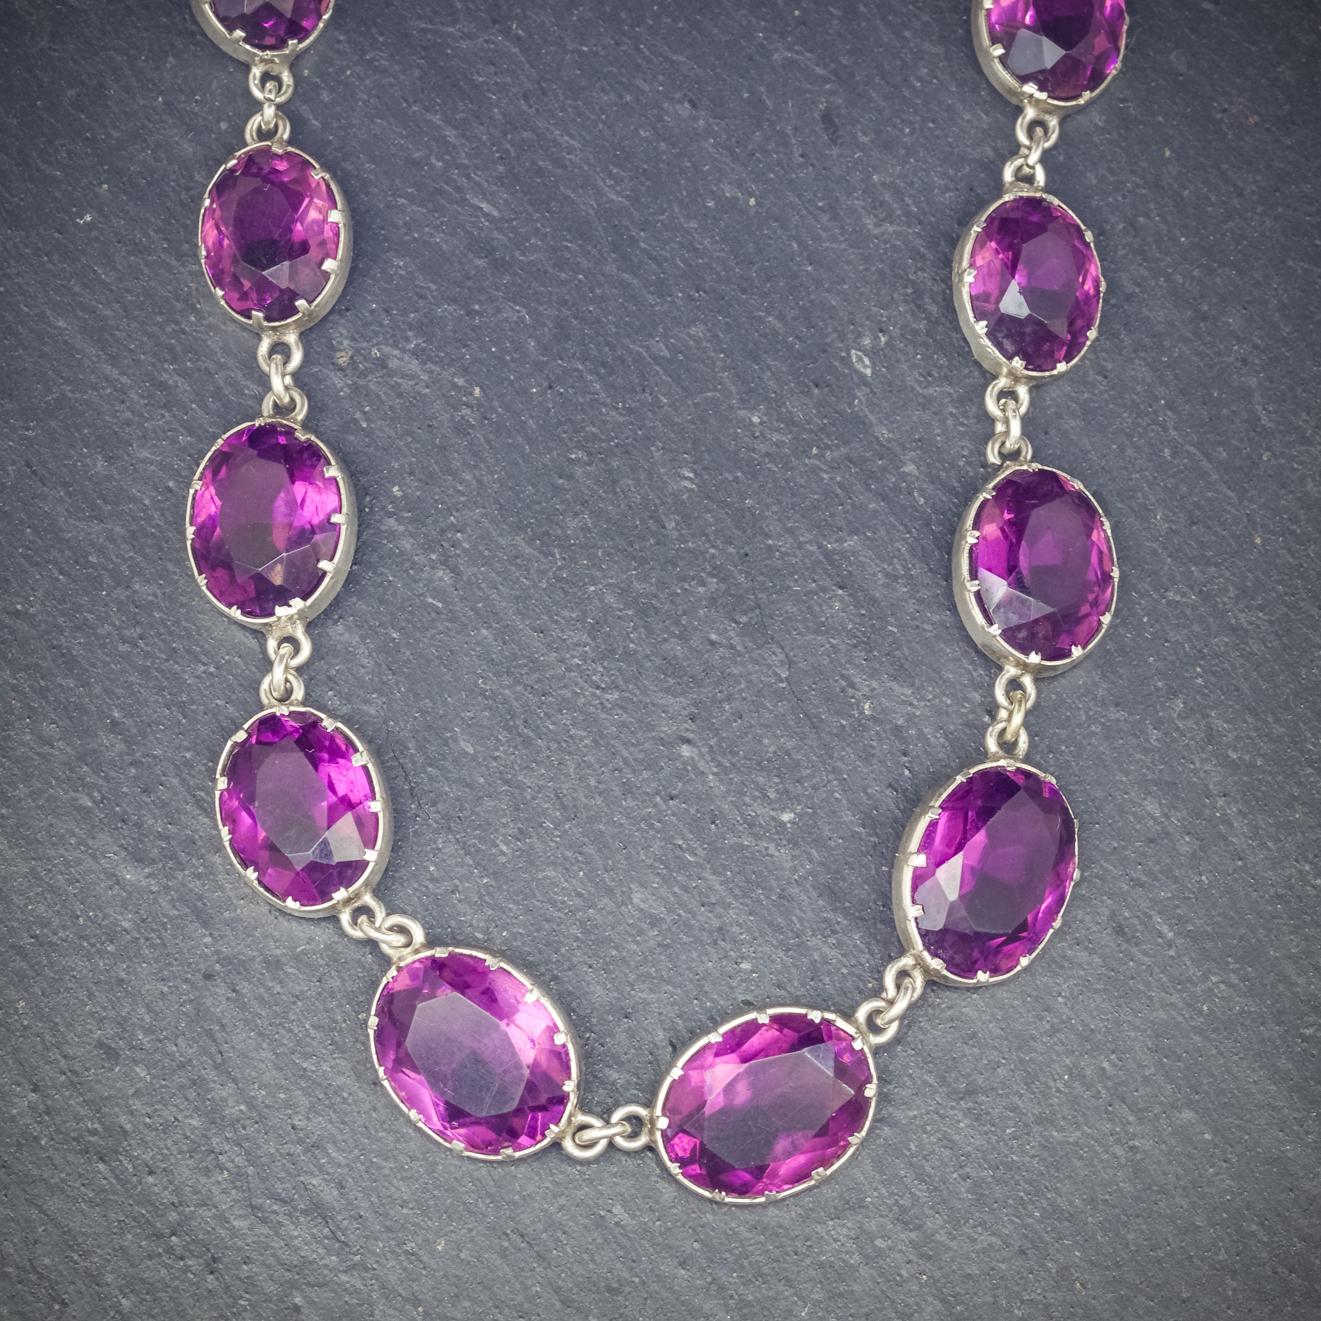 A beautiful antique Amethyst necklace from the Victorian era, Circa 1900

Adorned with approx. 60ct of Amethyst across the necklace, each stone has a vibrant purple hue with beautiful cut facets 

All set in Silver and fitted with a secure clasp